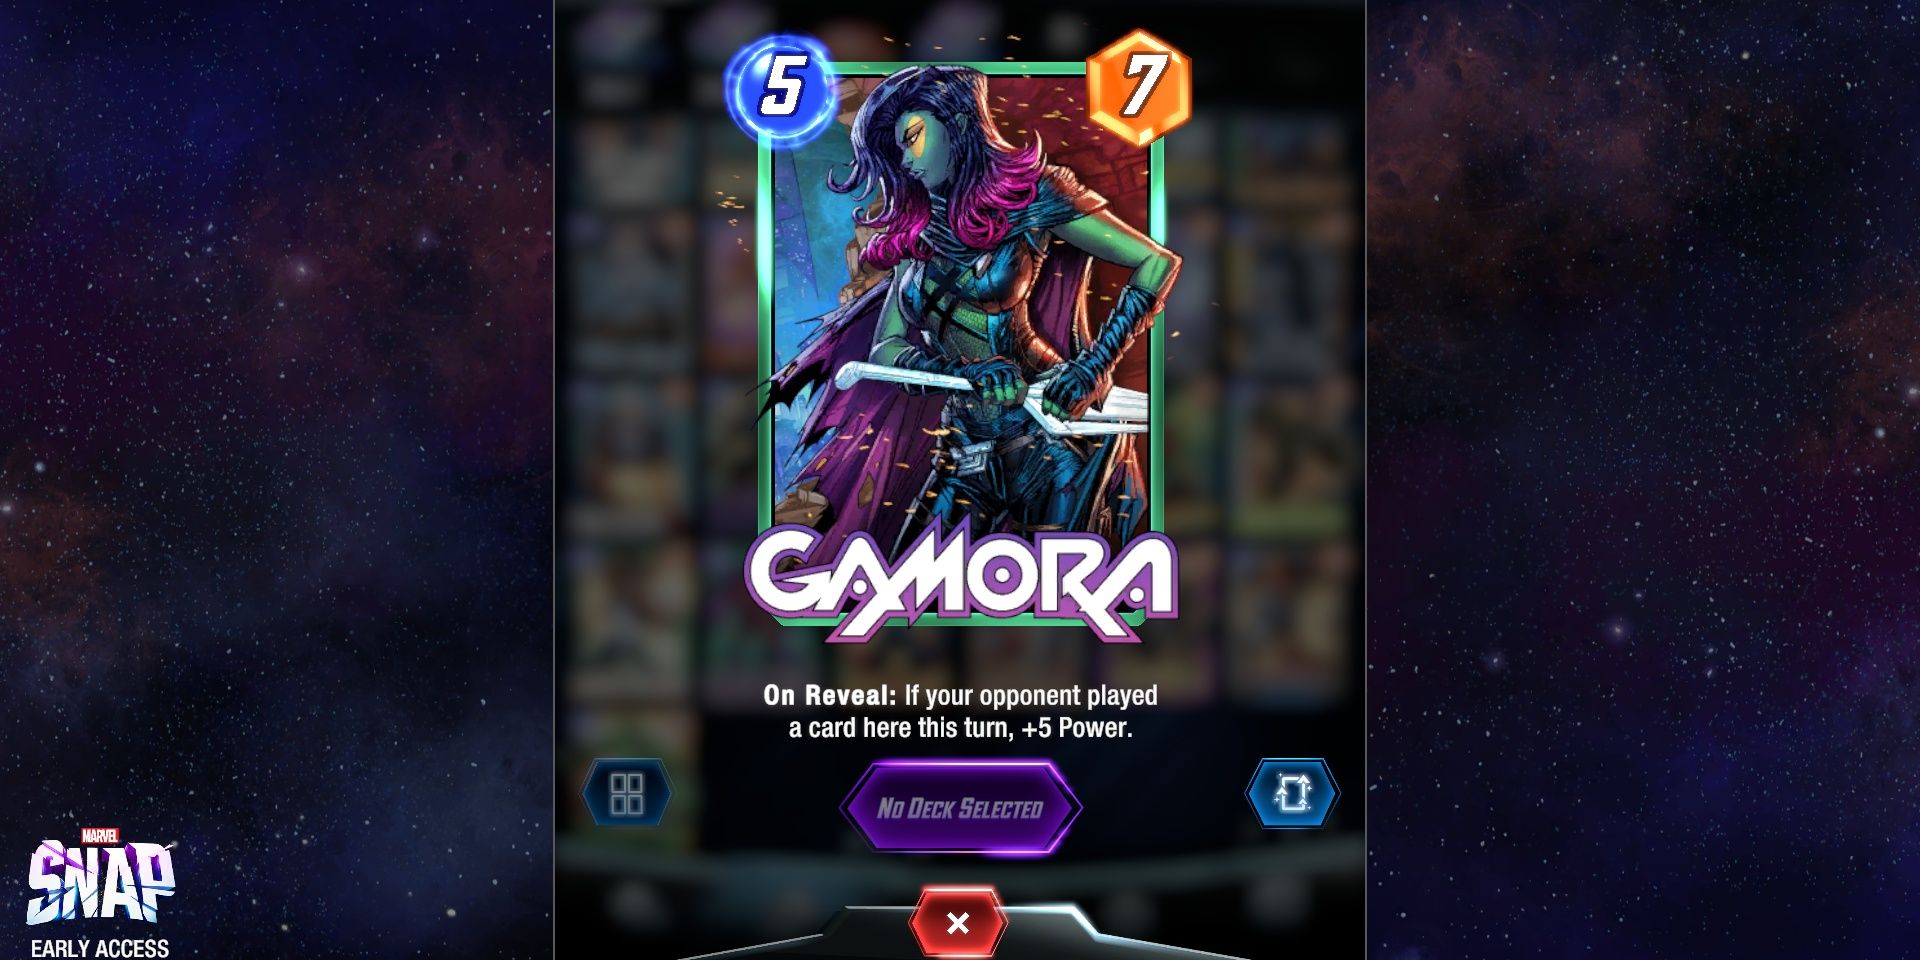 The Gamora card in Marvel Snap on top of promotional art in a split image